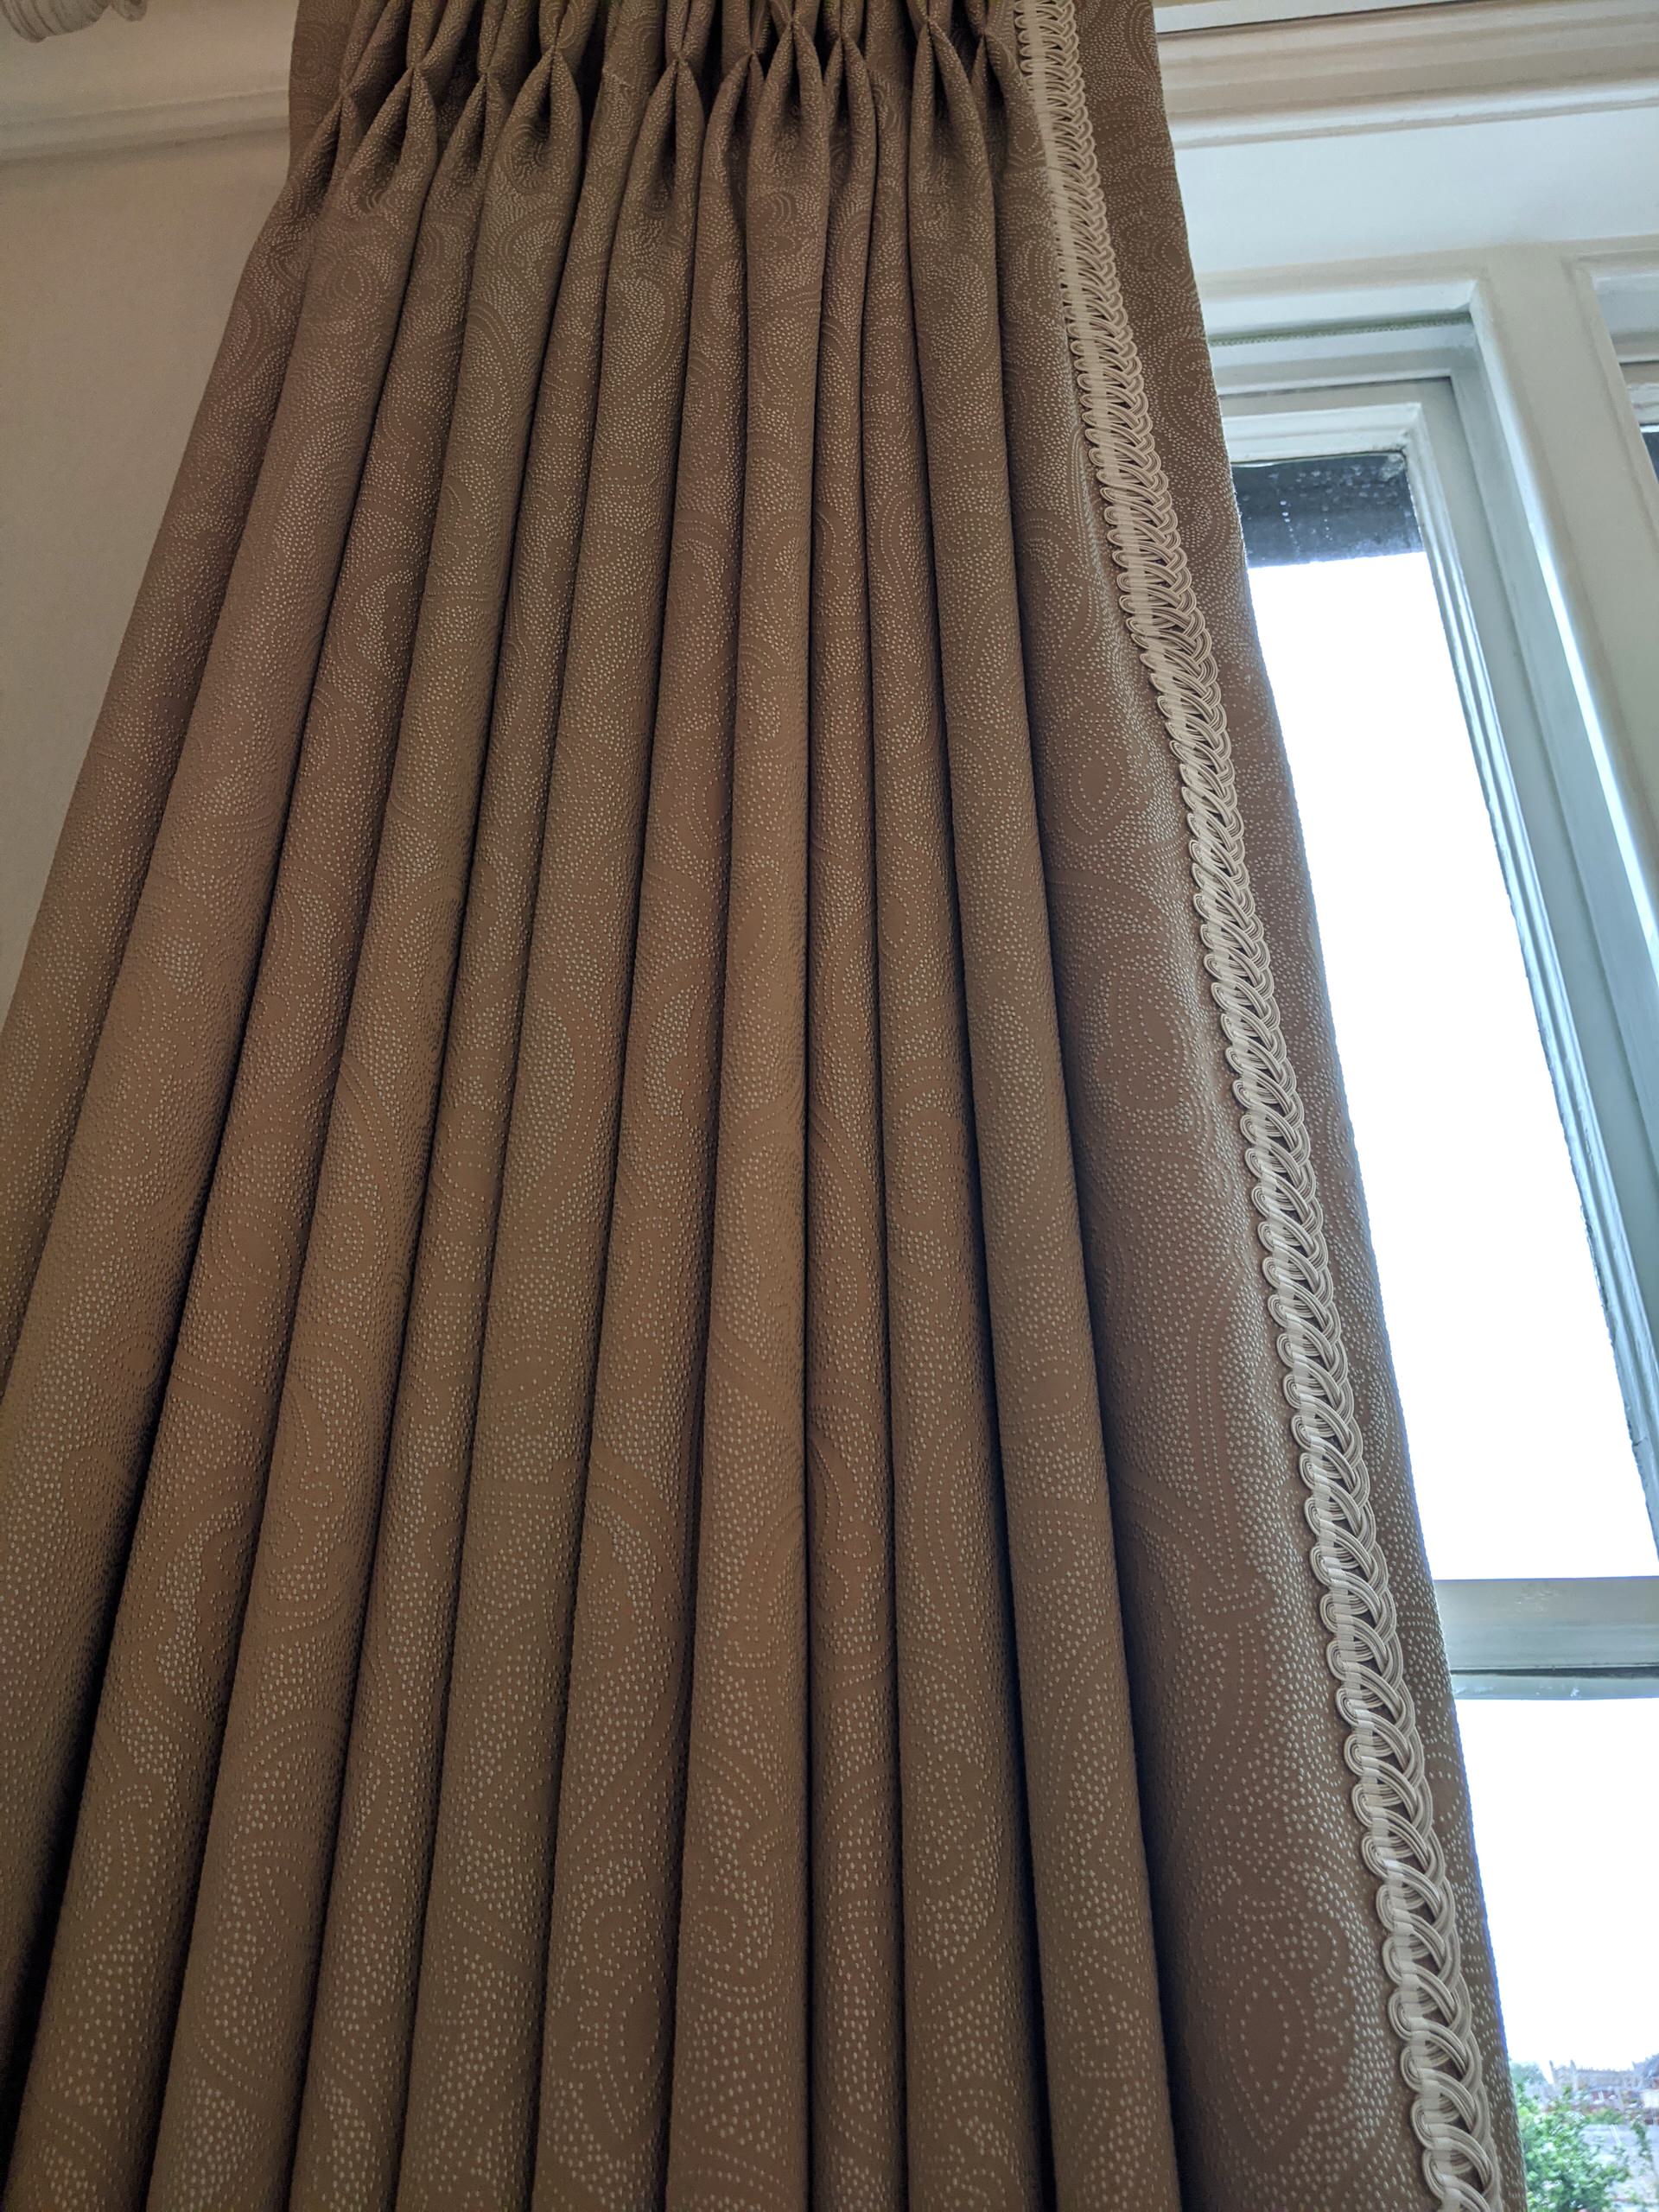 Tailor-made window treatments